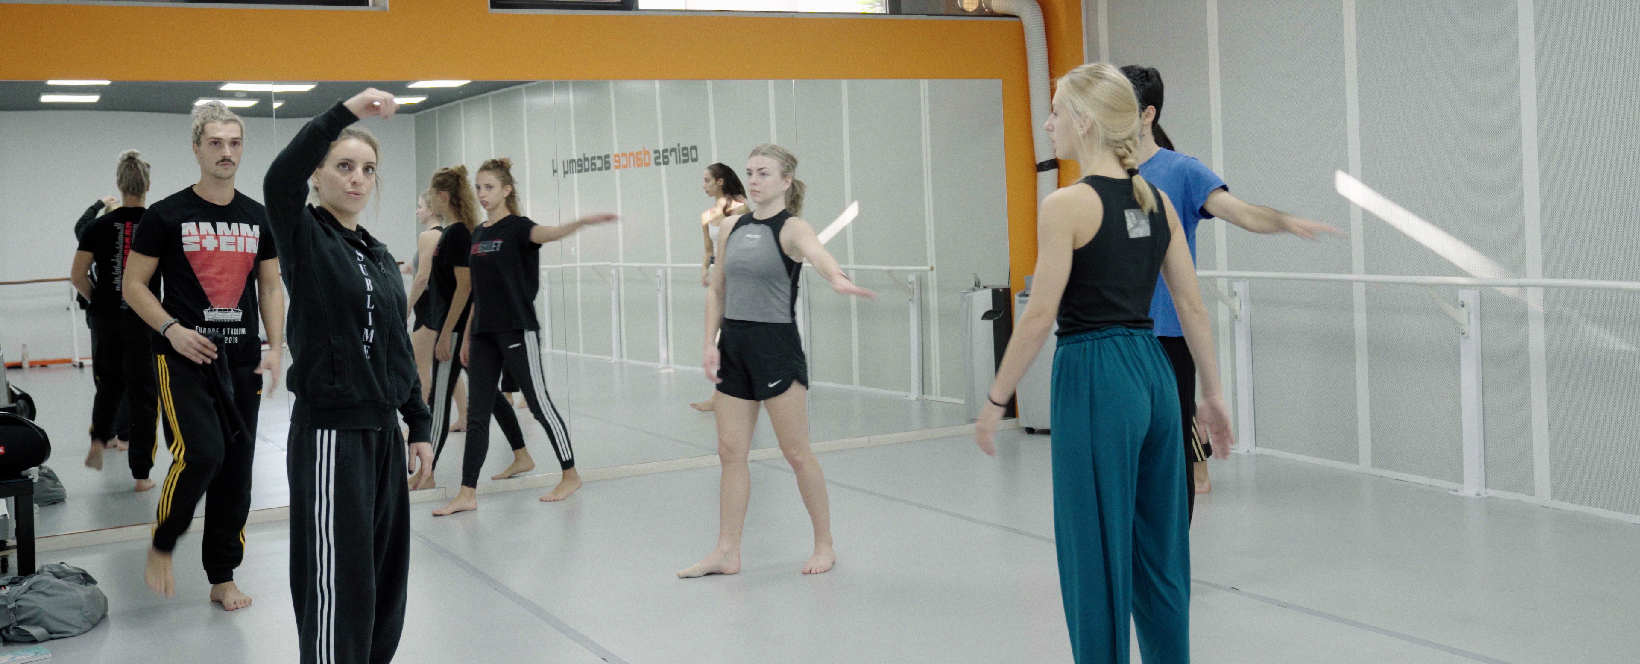 Workshop with Sublime Dance Company